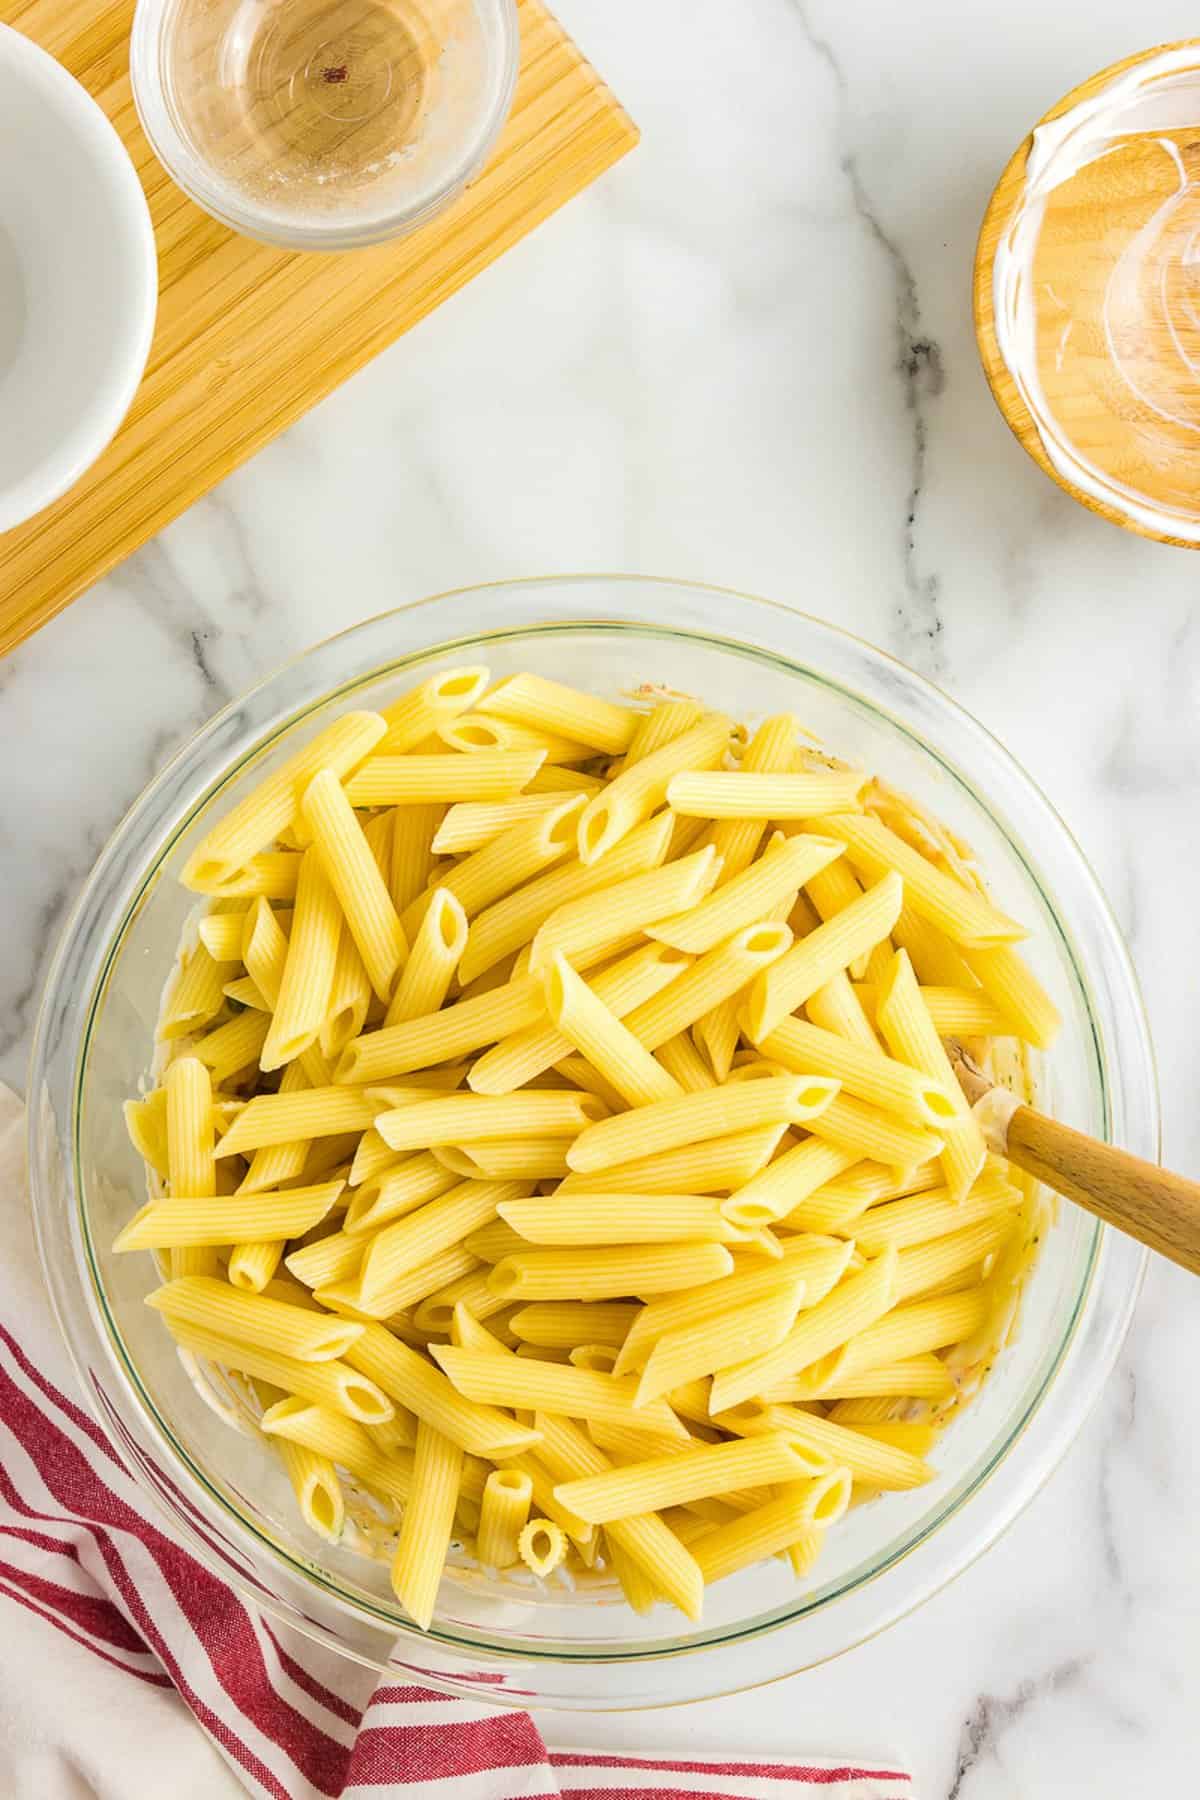 Penne pasta in glass